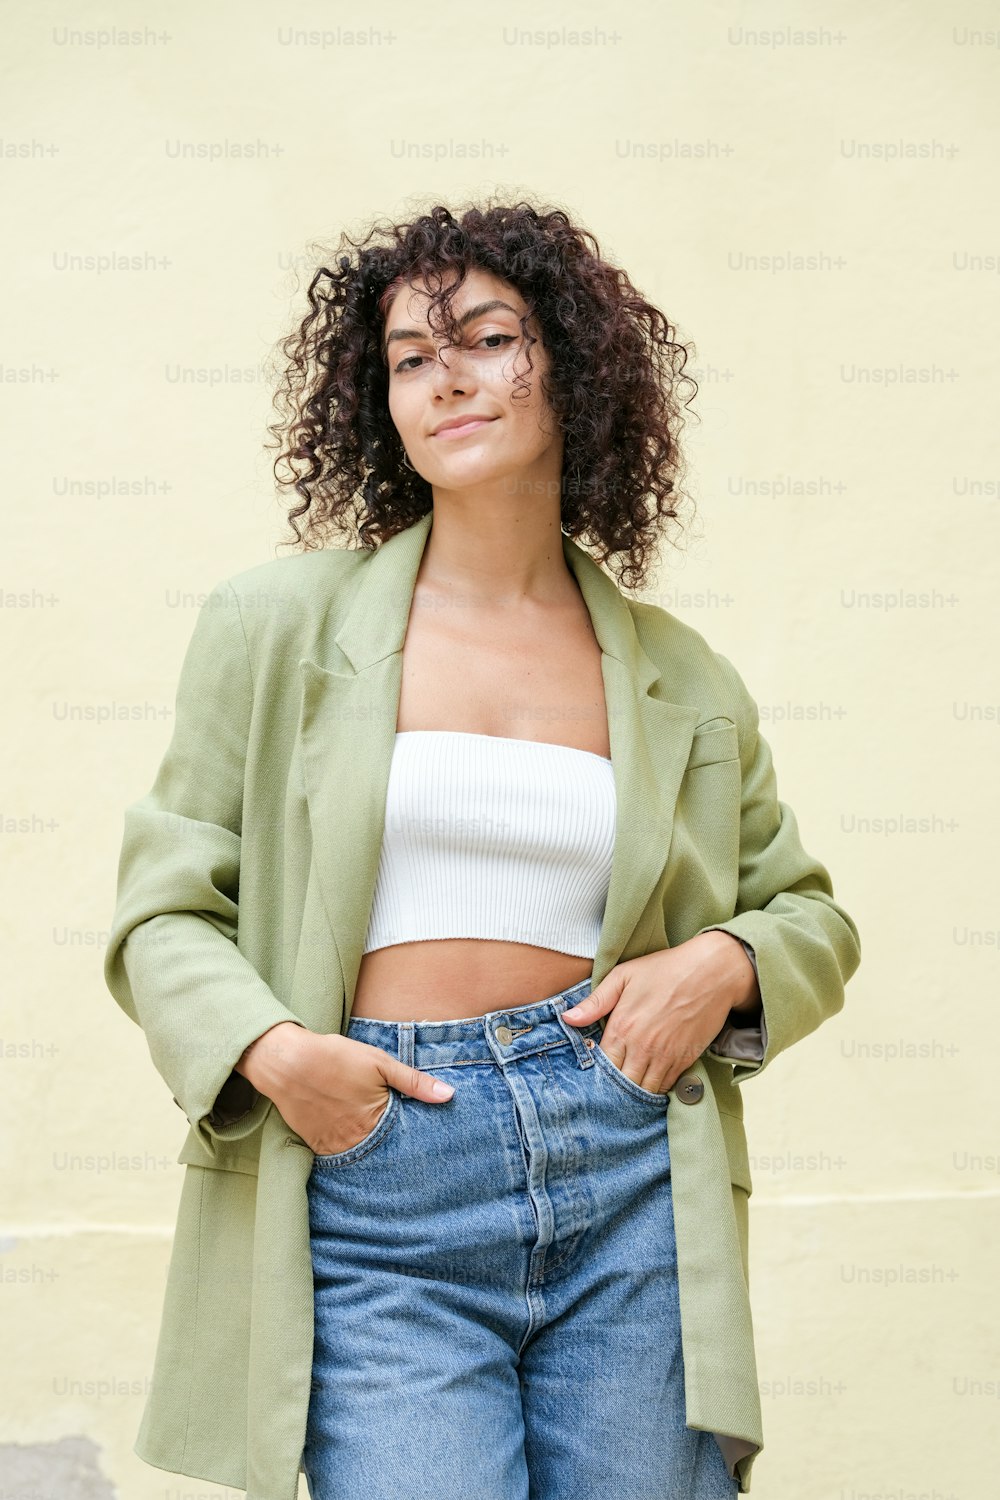 a woman with curly hair wearing a green jacket and jeans